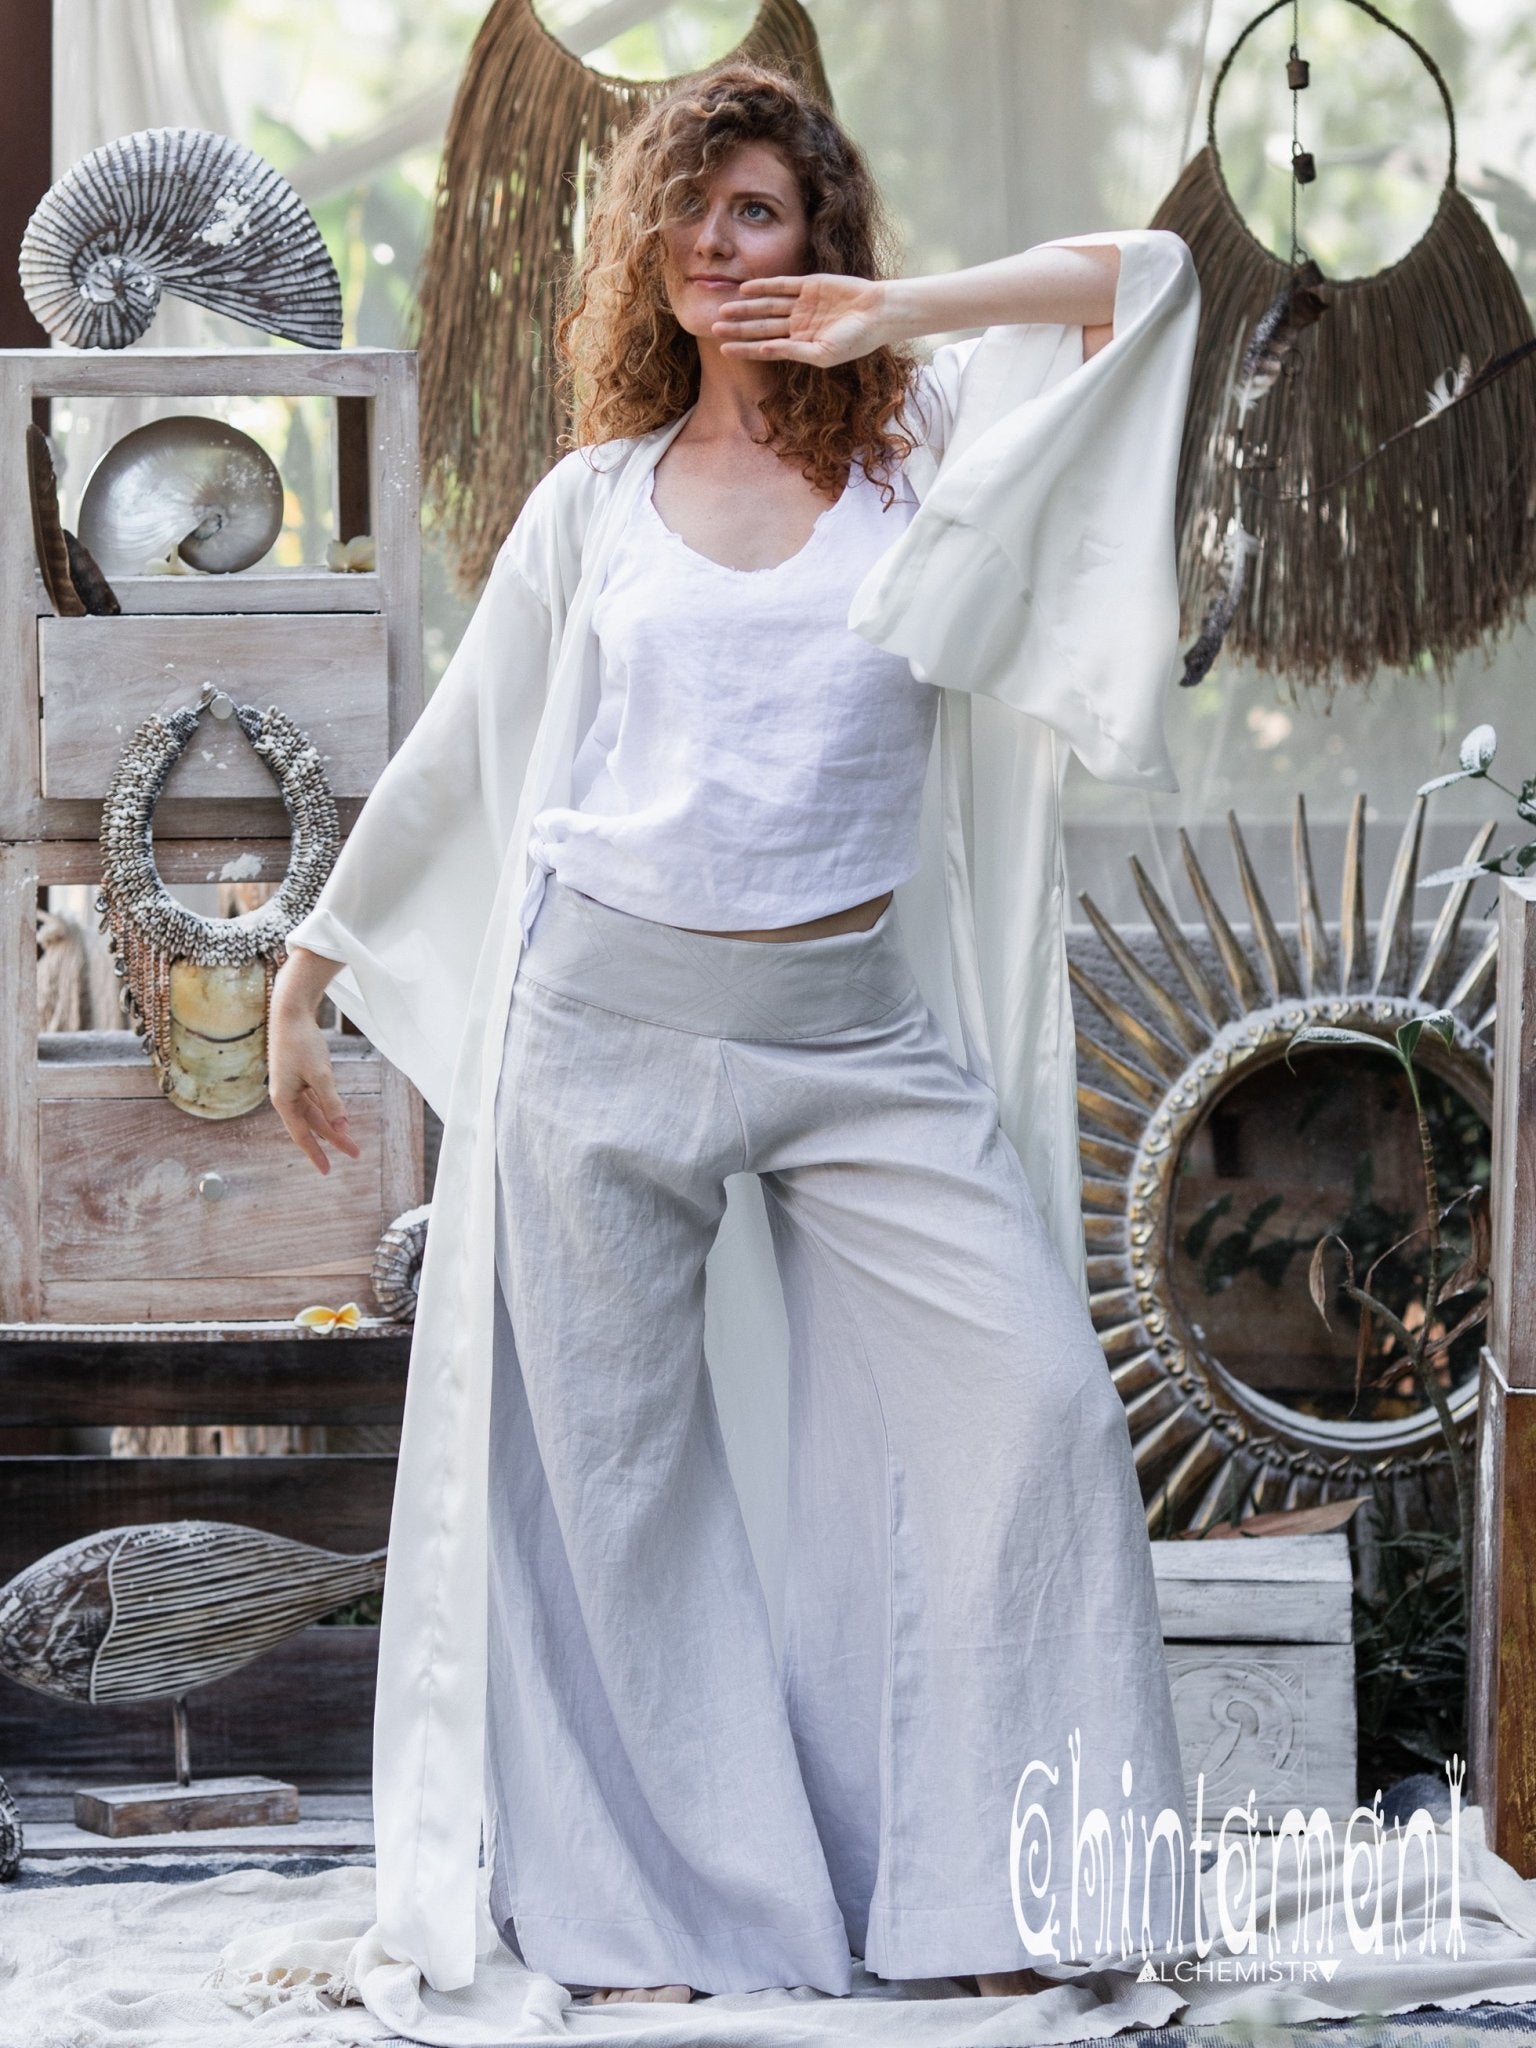 15 Ways To Style Palazzo Pants – Real King Vintage